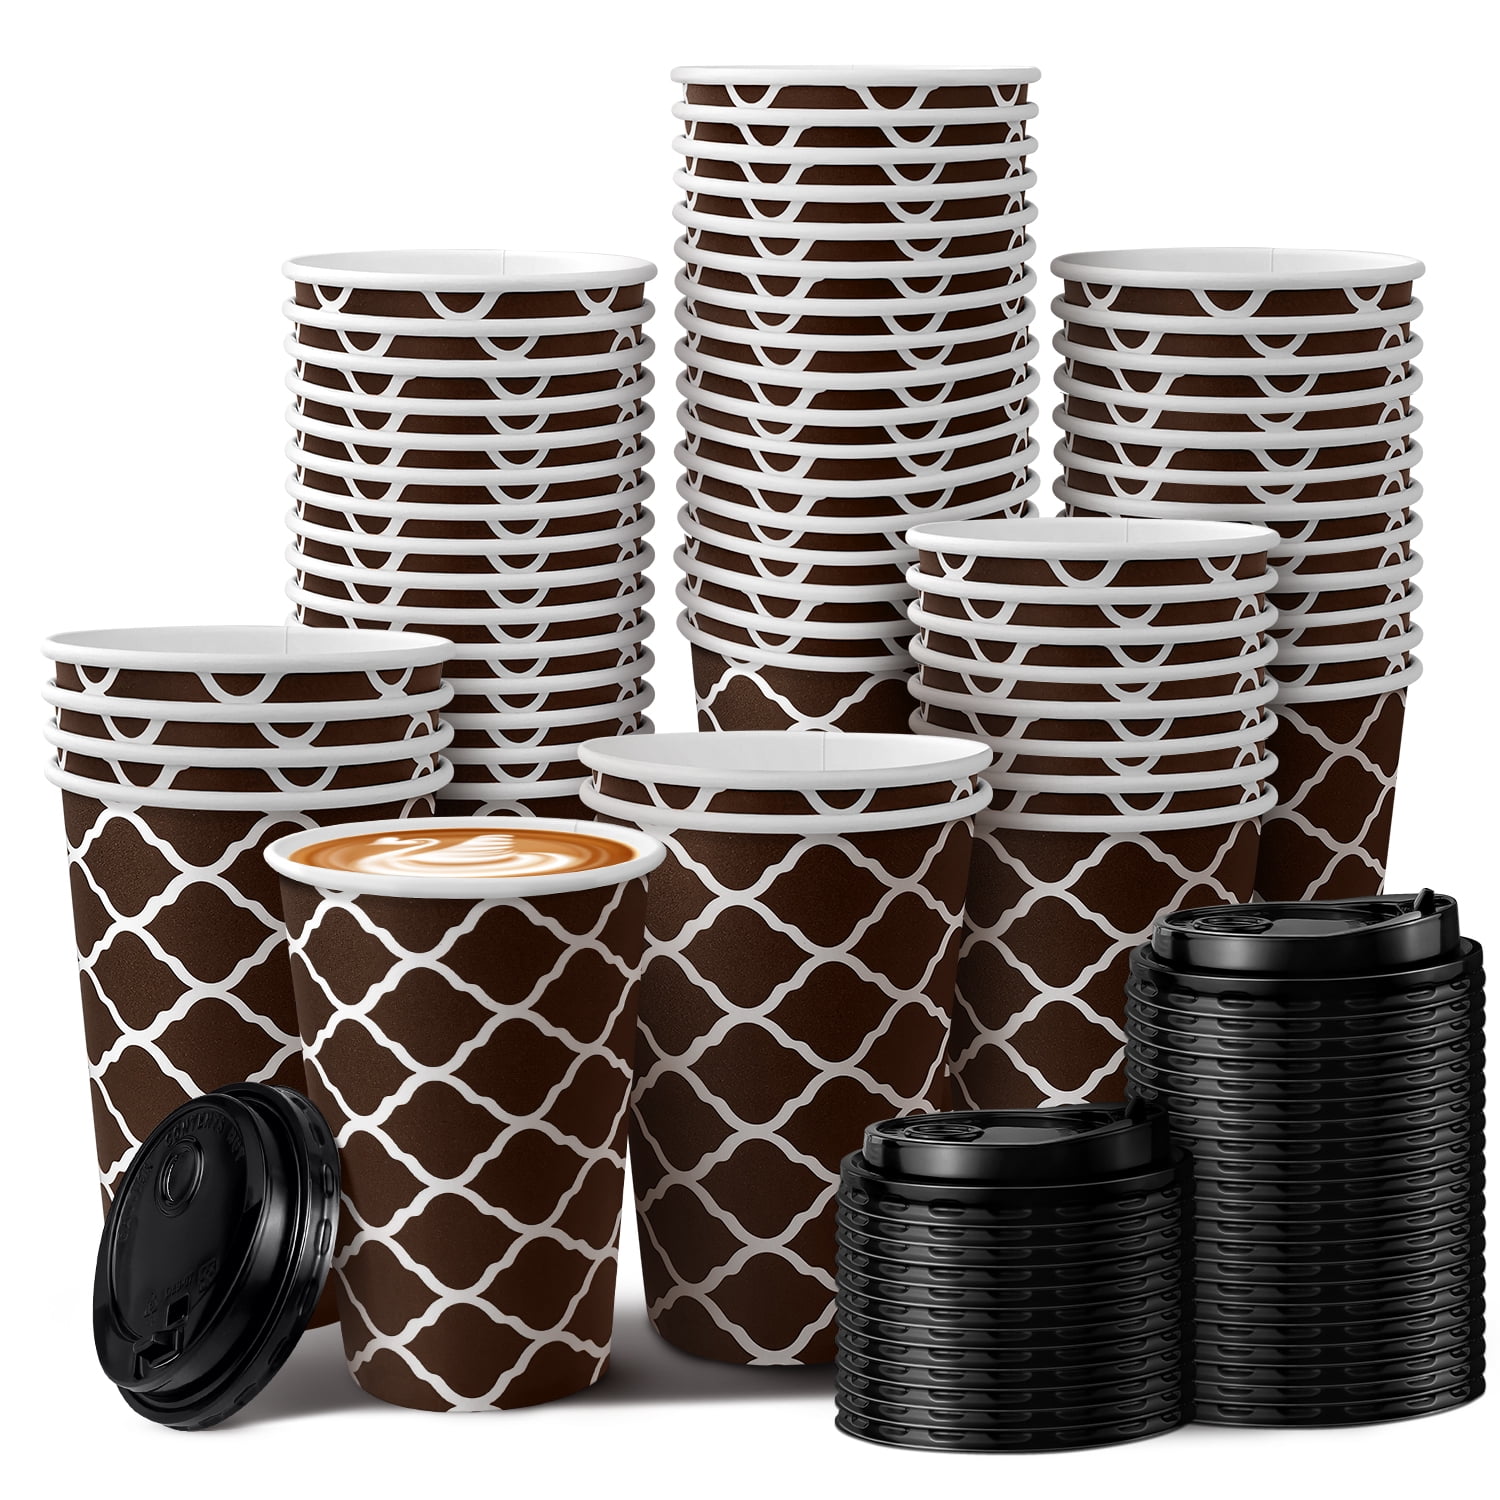 Hermes 16oz Styrofoam Cups - Rags and Riches Lifestyle Boutique